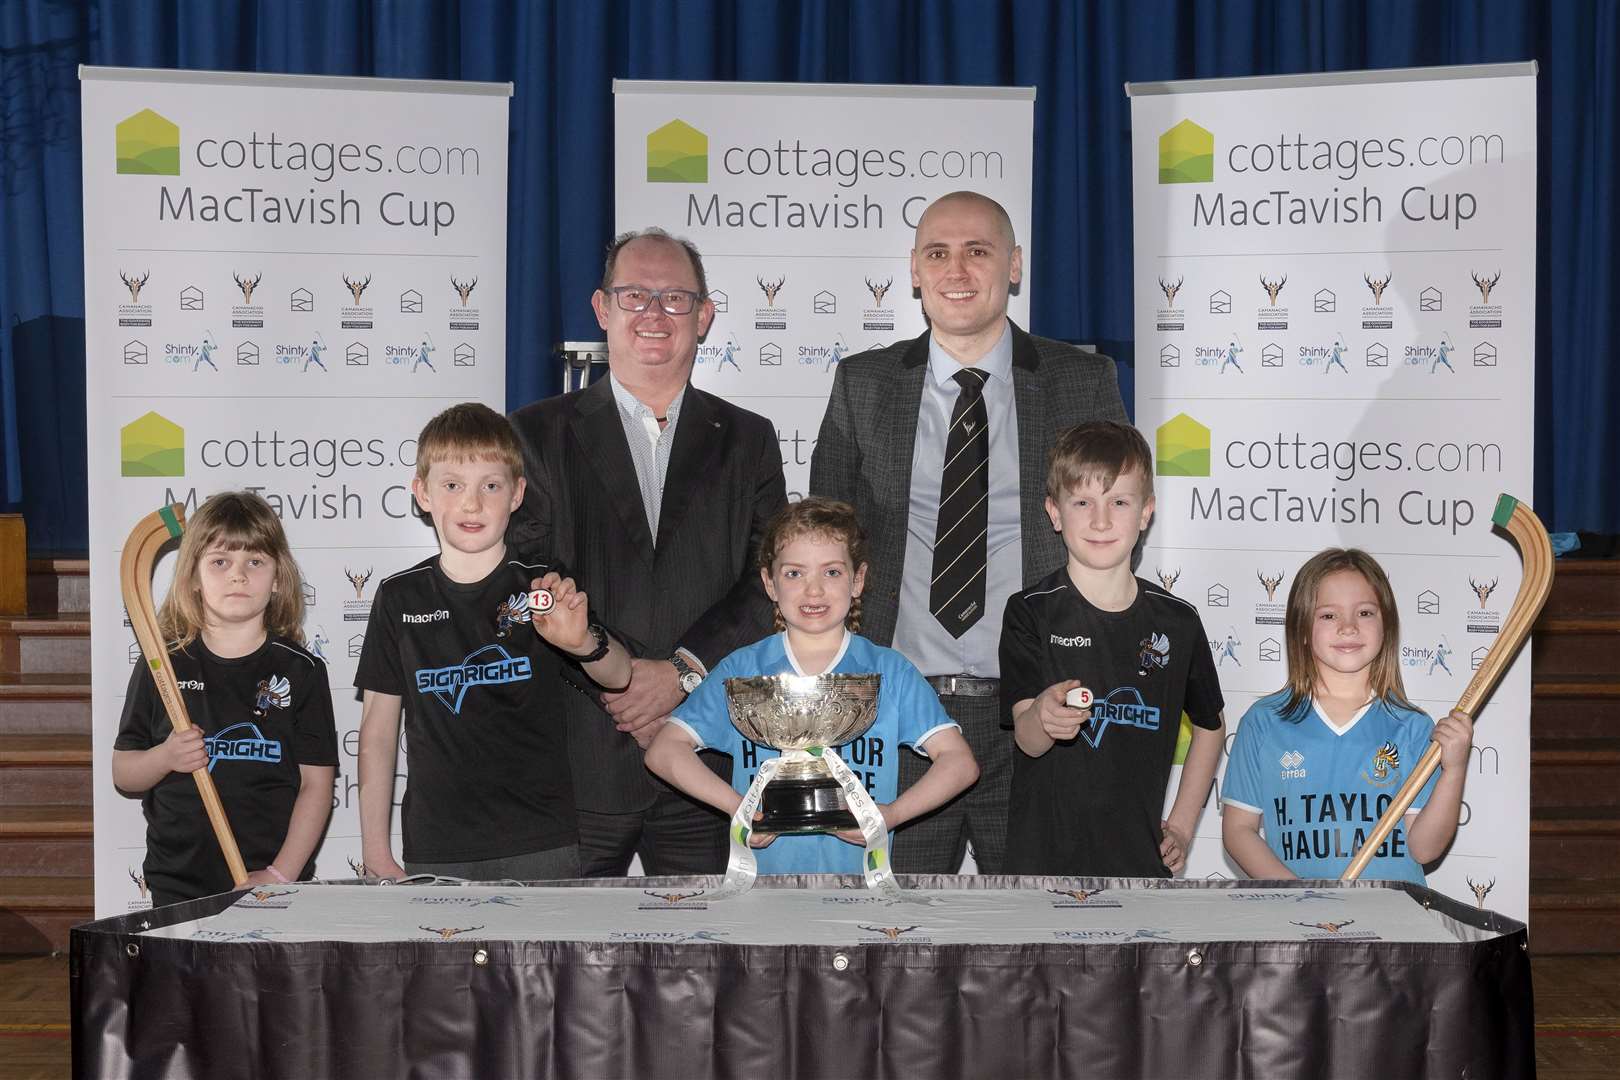 Camanachd Association chief executive Derek Keir and Shaun Gourley of title sponsors Cottages.com pose alongside Hilton Primary school kids who helped to conduct the first round draw. Picture: Neil Paterson